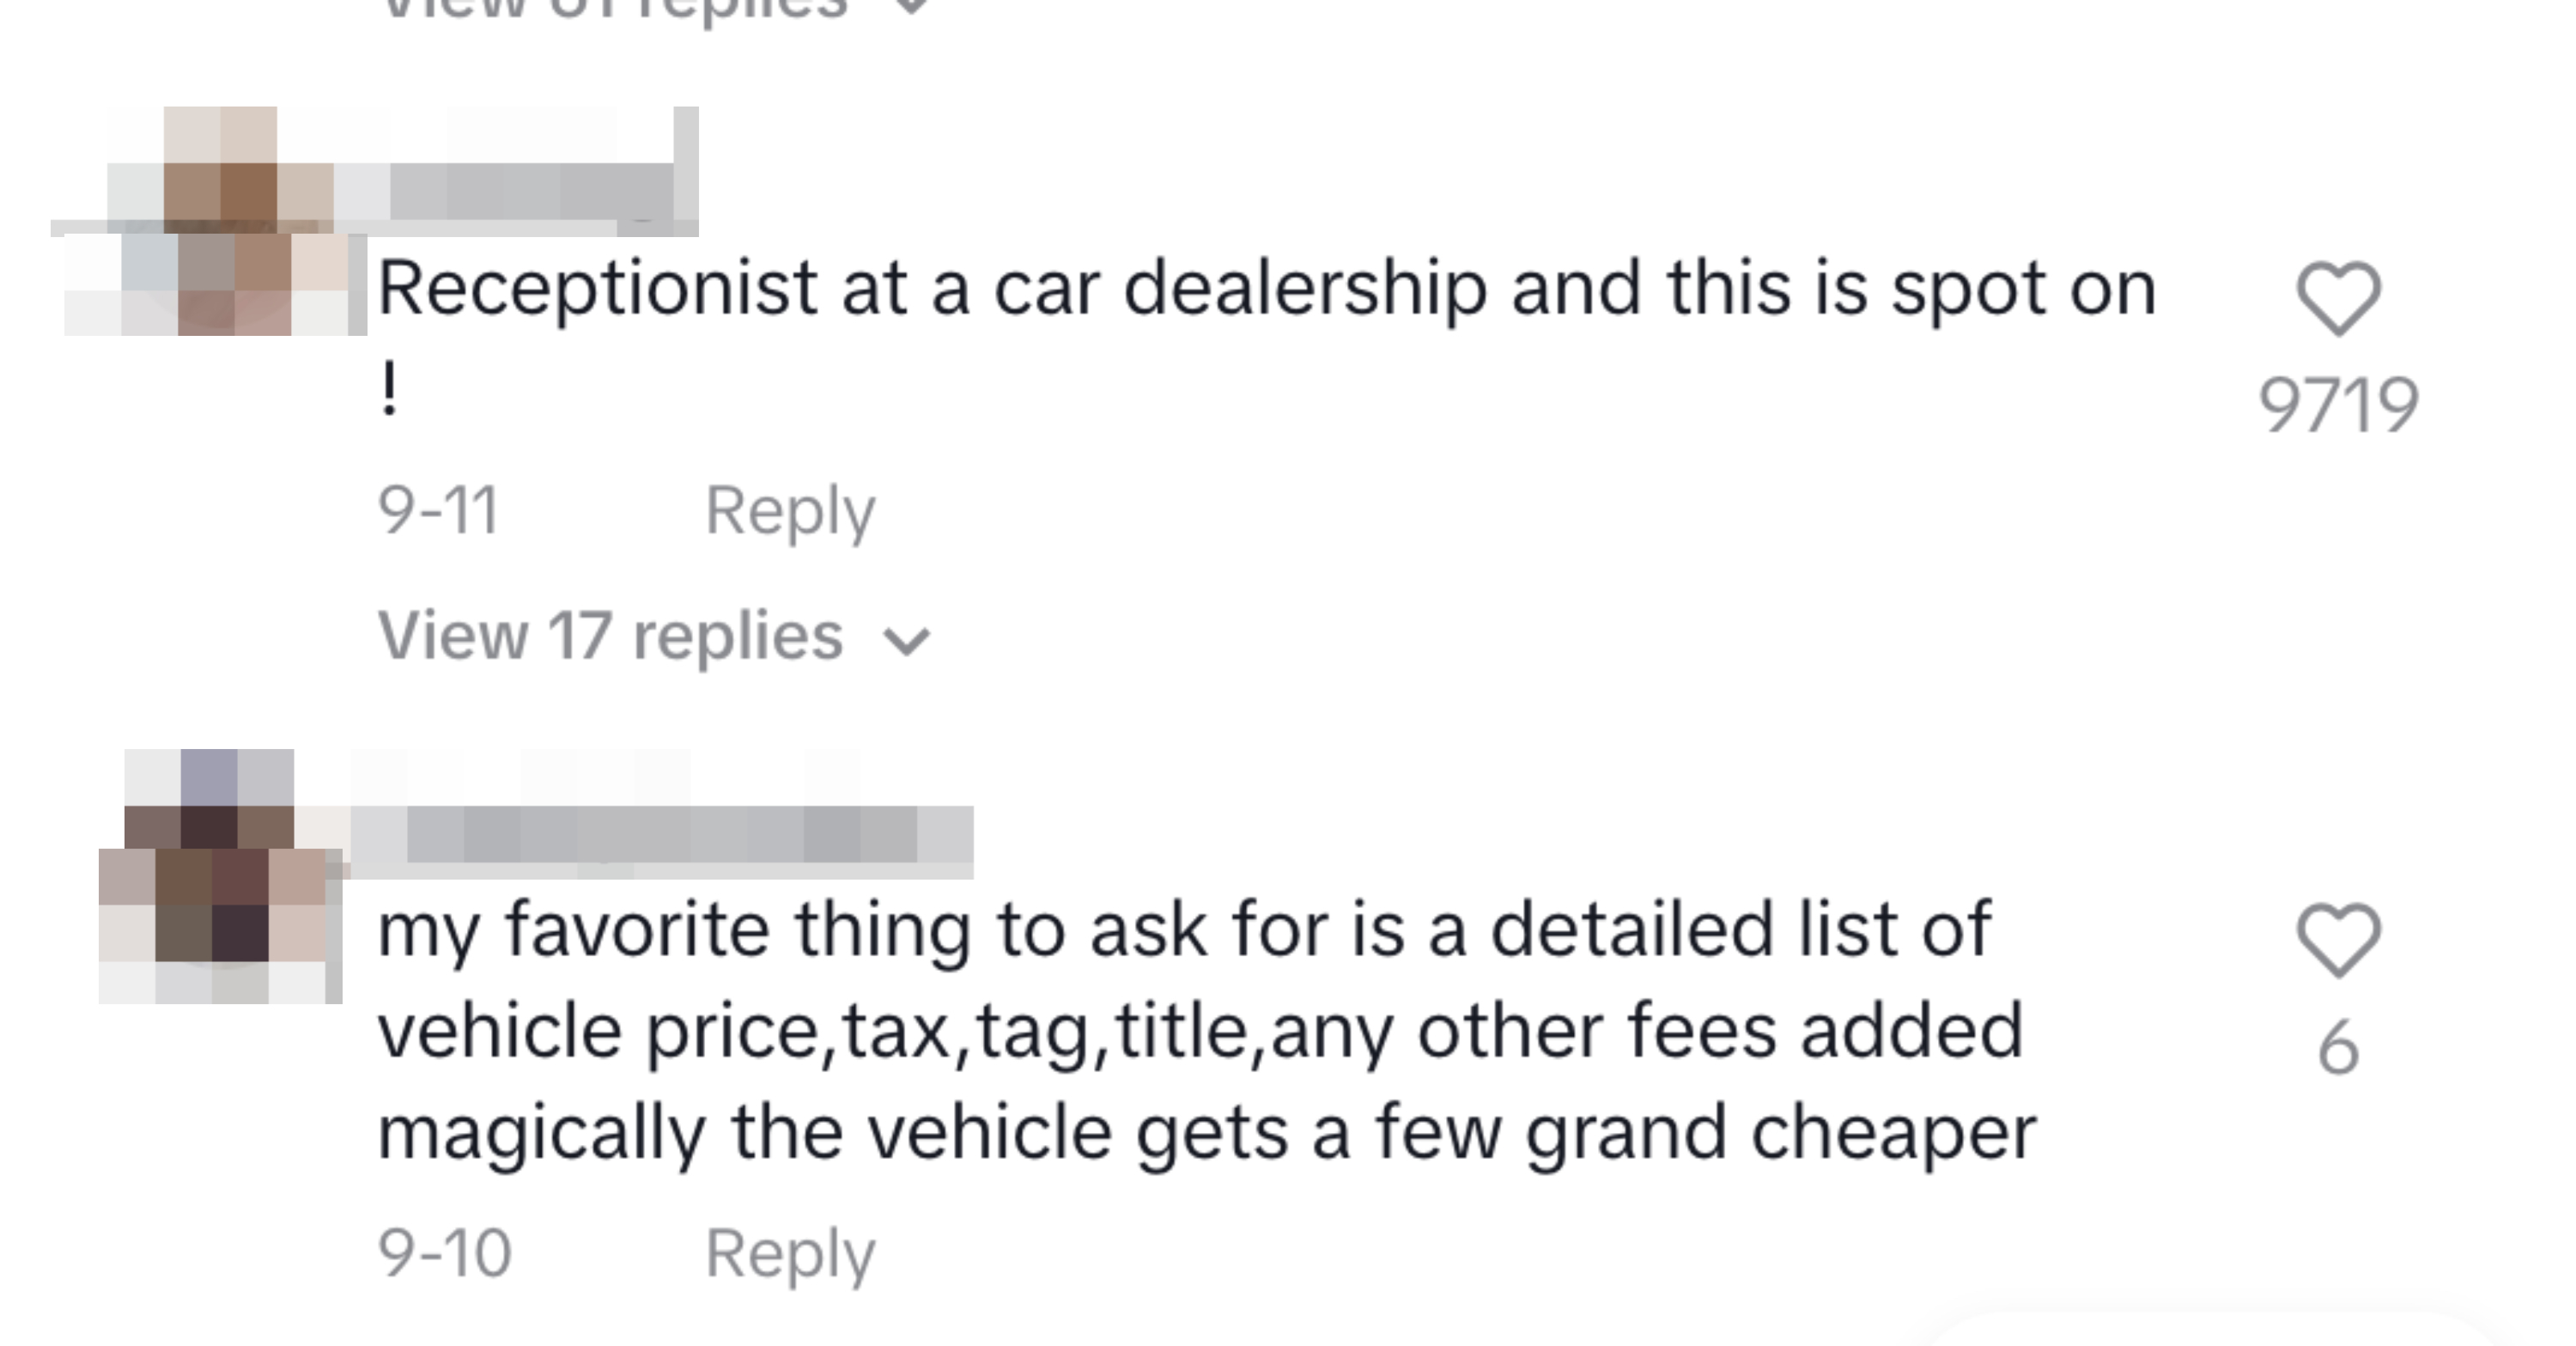 comments on her video including, &quot;Receptionist at a car dealership and this is spot on&quot;